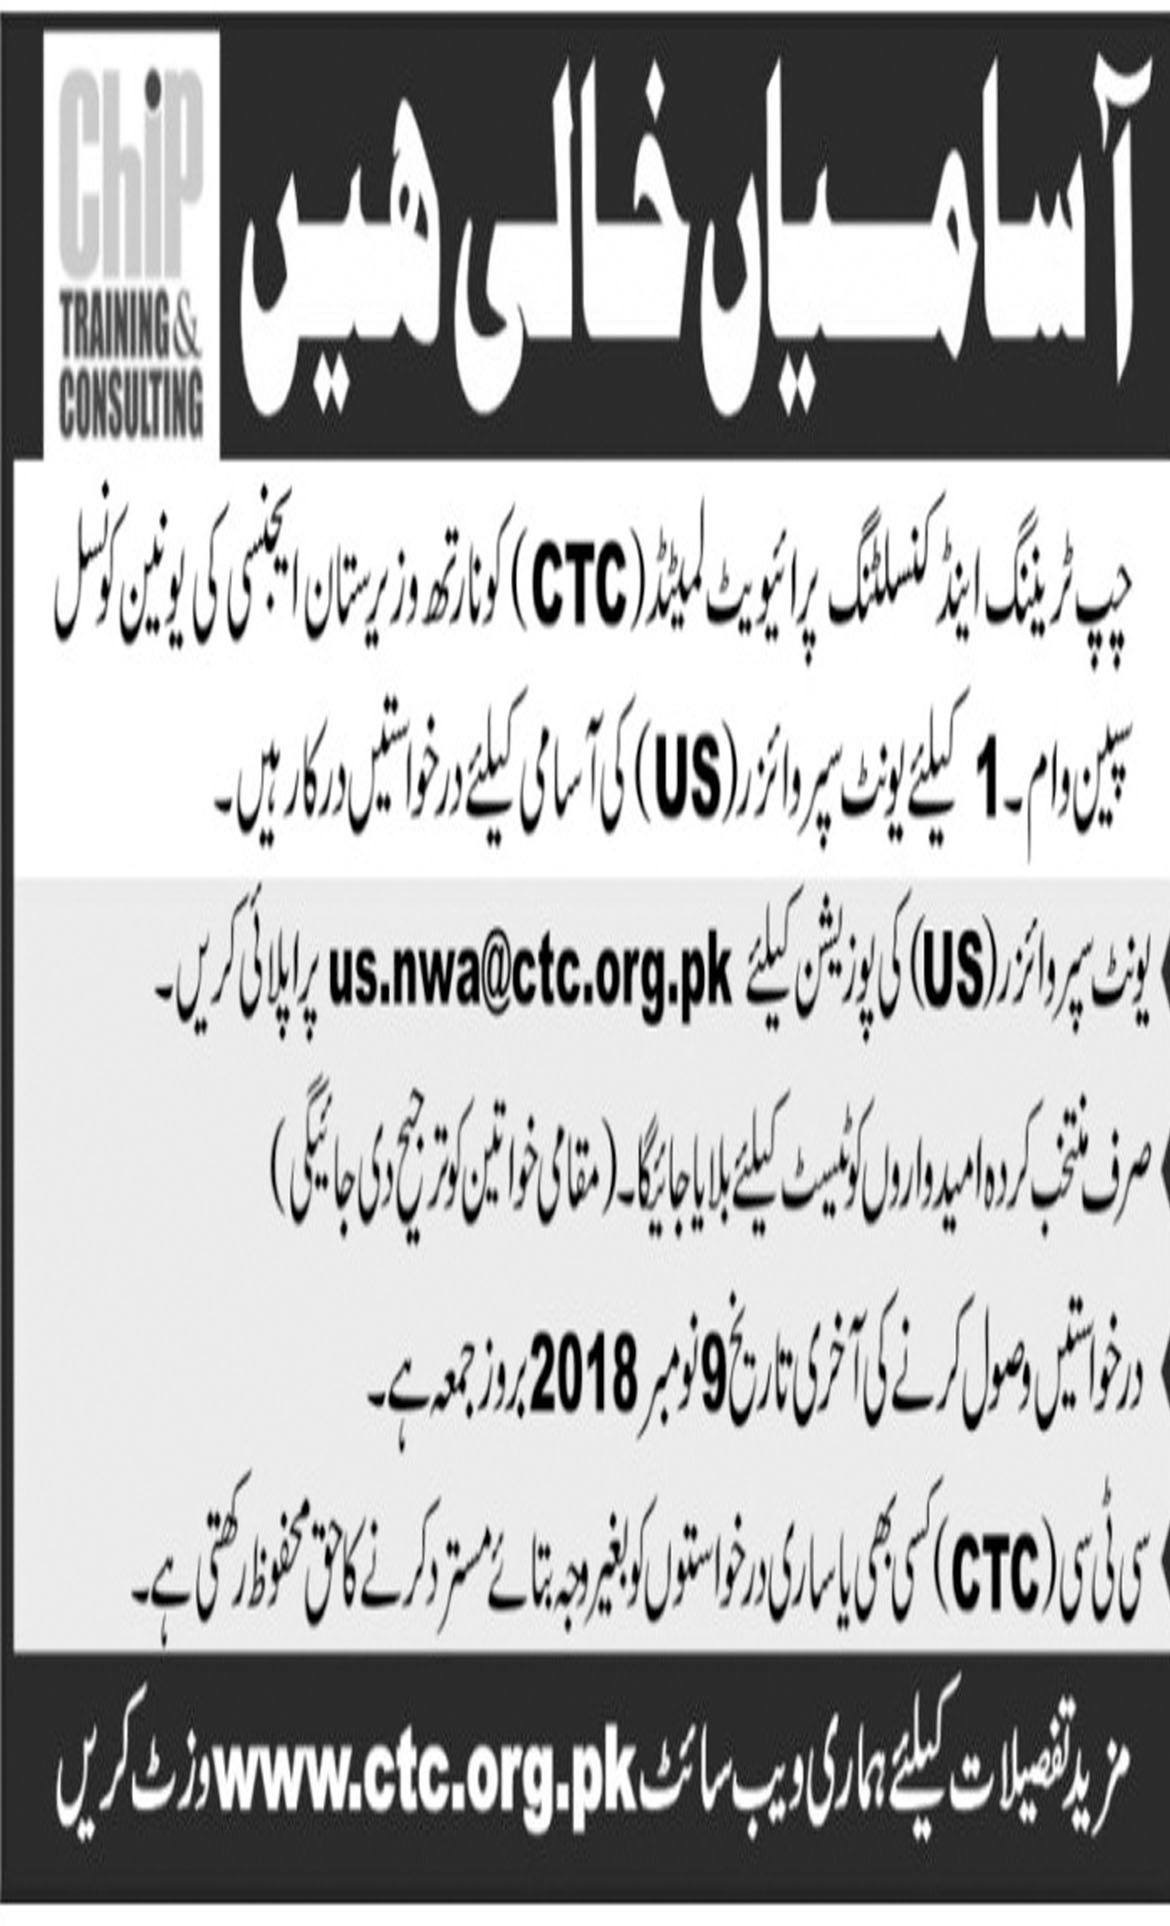 Jobs In Chip Training And Consulting 06 Nov 2018